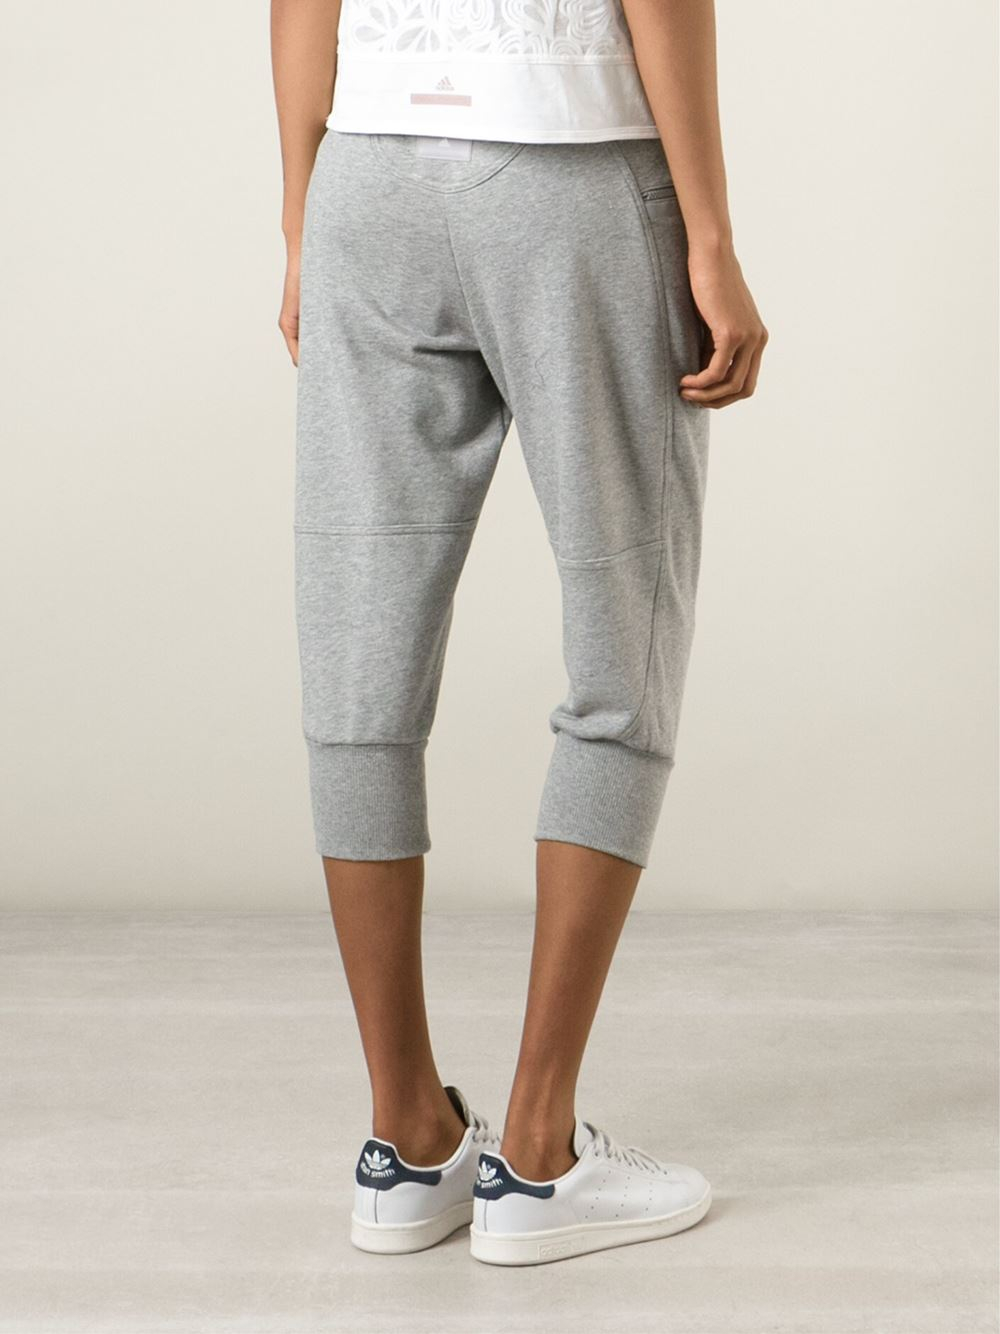 adidas By Stella McCartney Cropped Track Pants in Grey (Gray) - Lyst